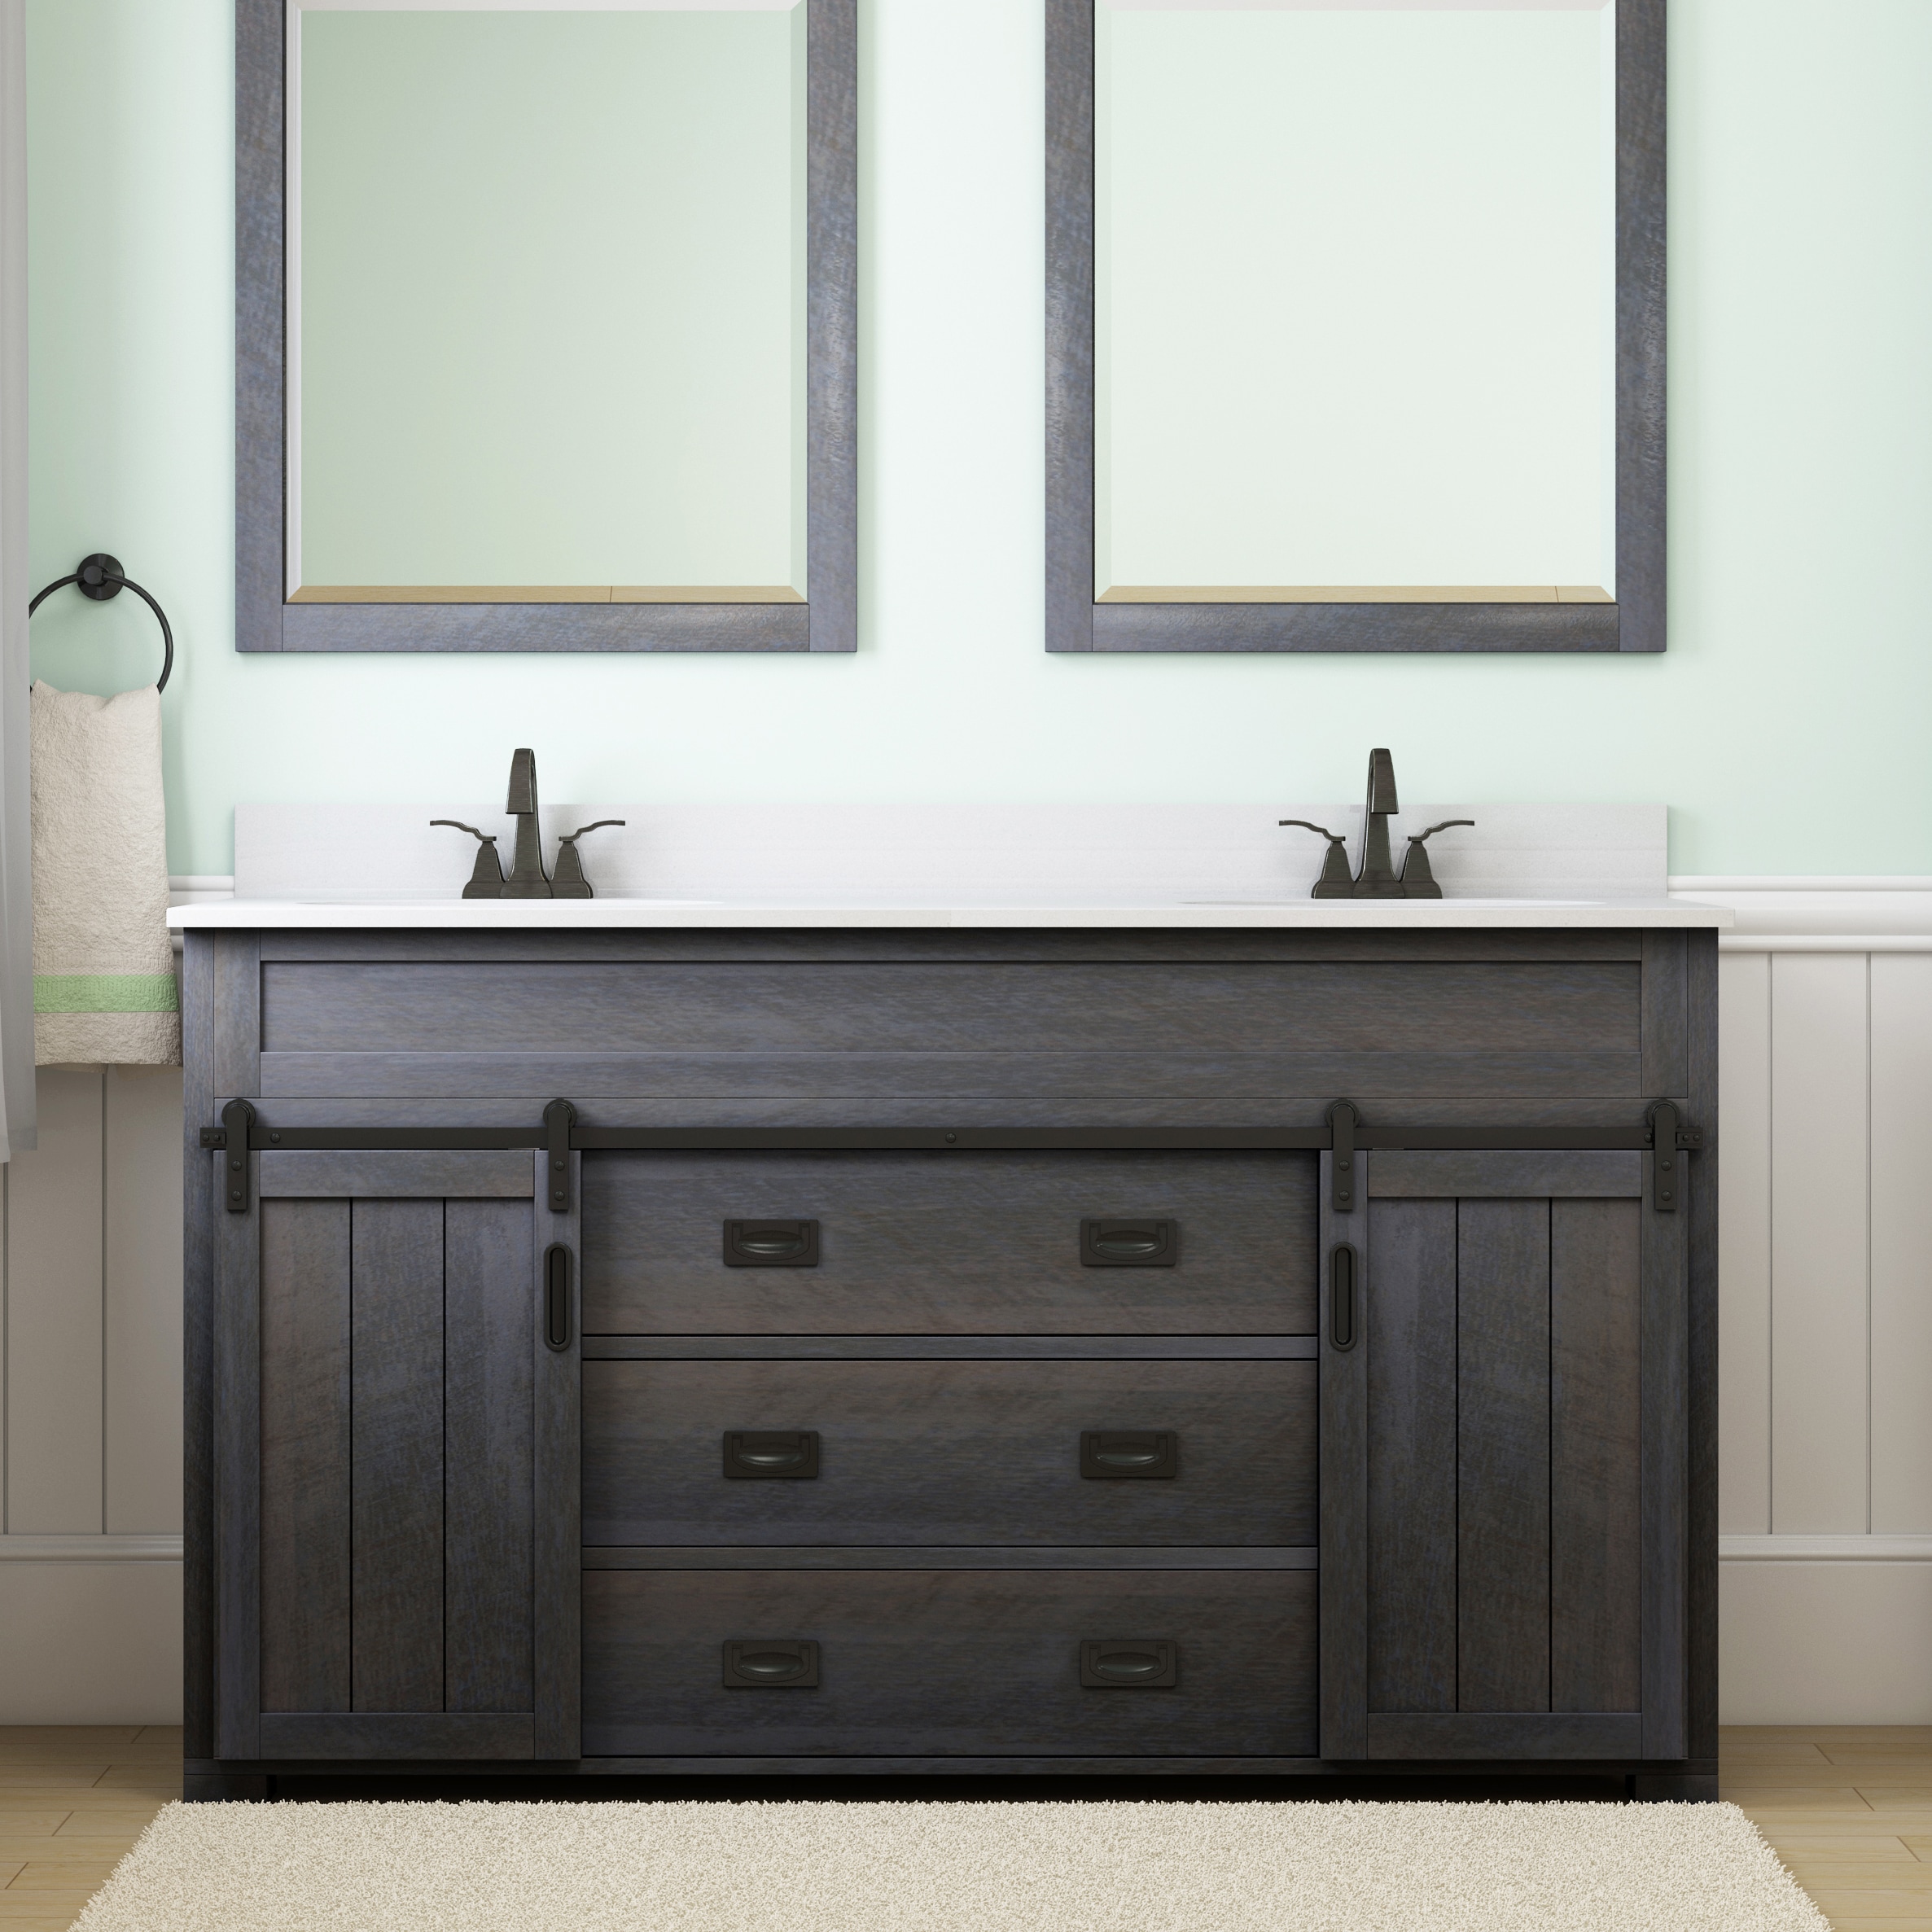 15 Compact Vanities Perfect for Small Bathrooms! - Northern Feeling